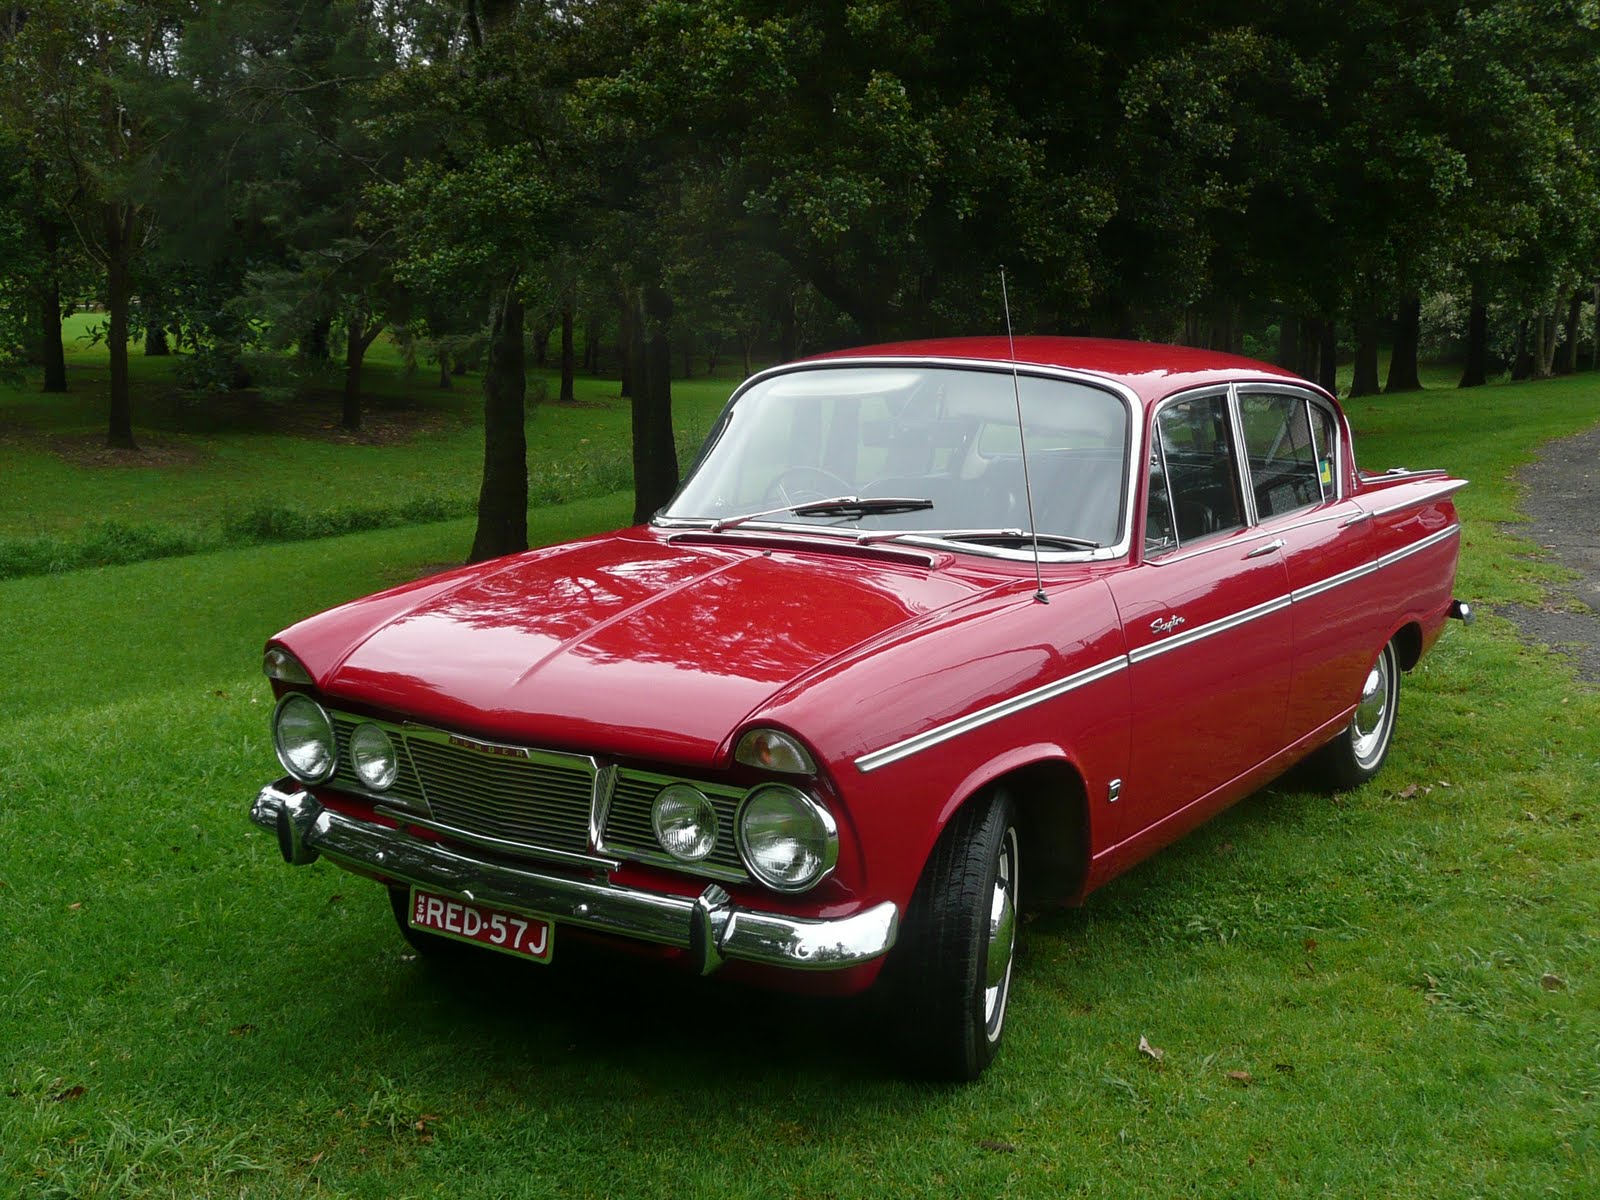 my humber sceptre: Humber Sceptre - Front View